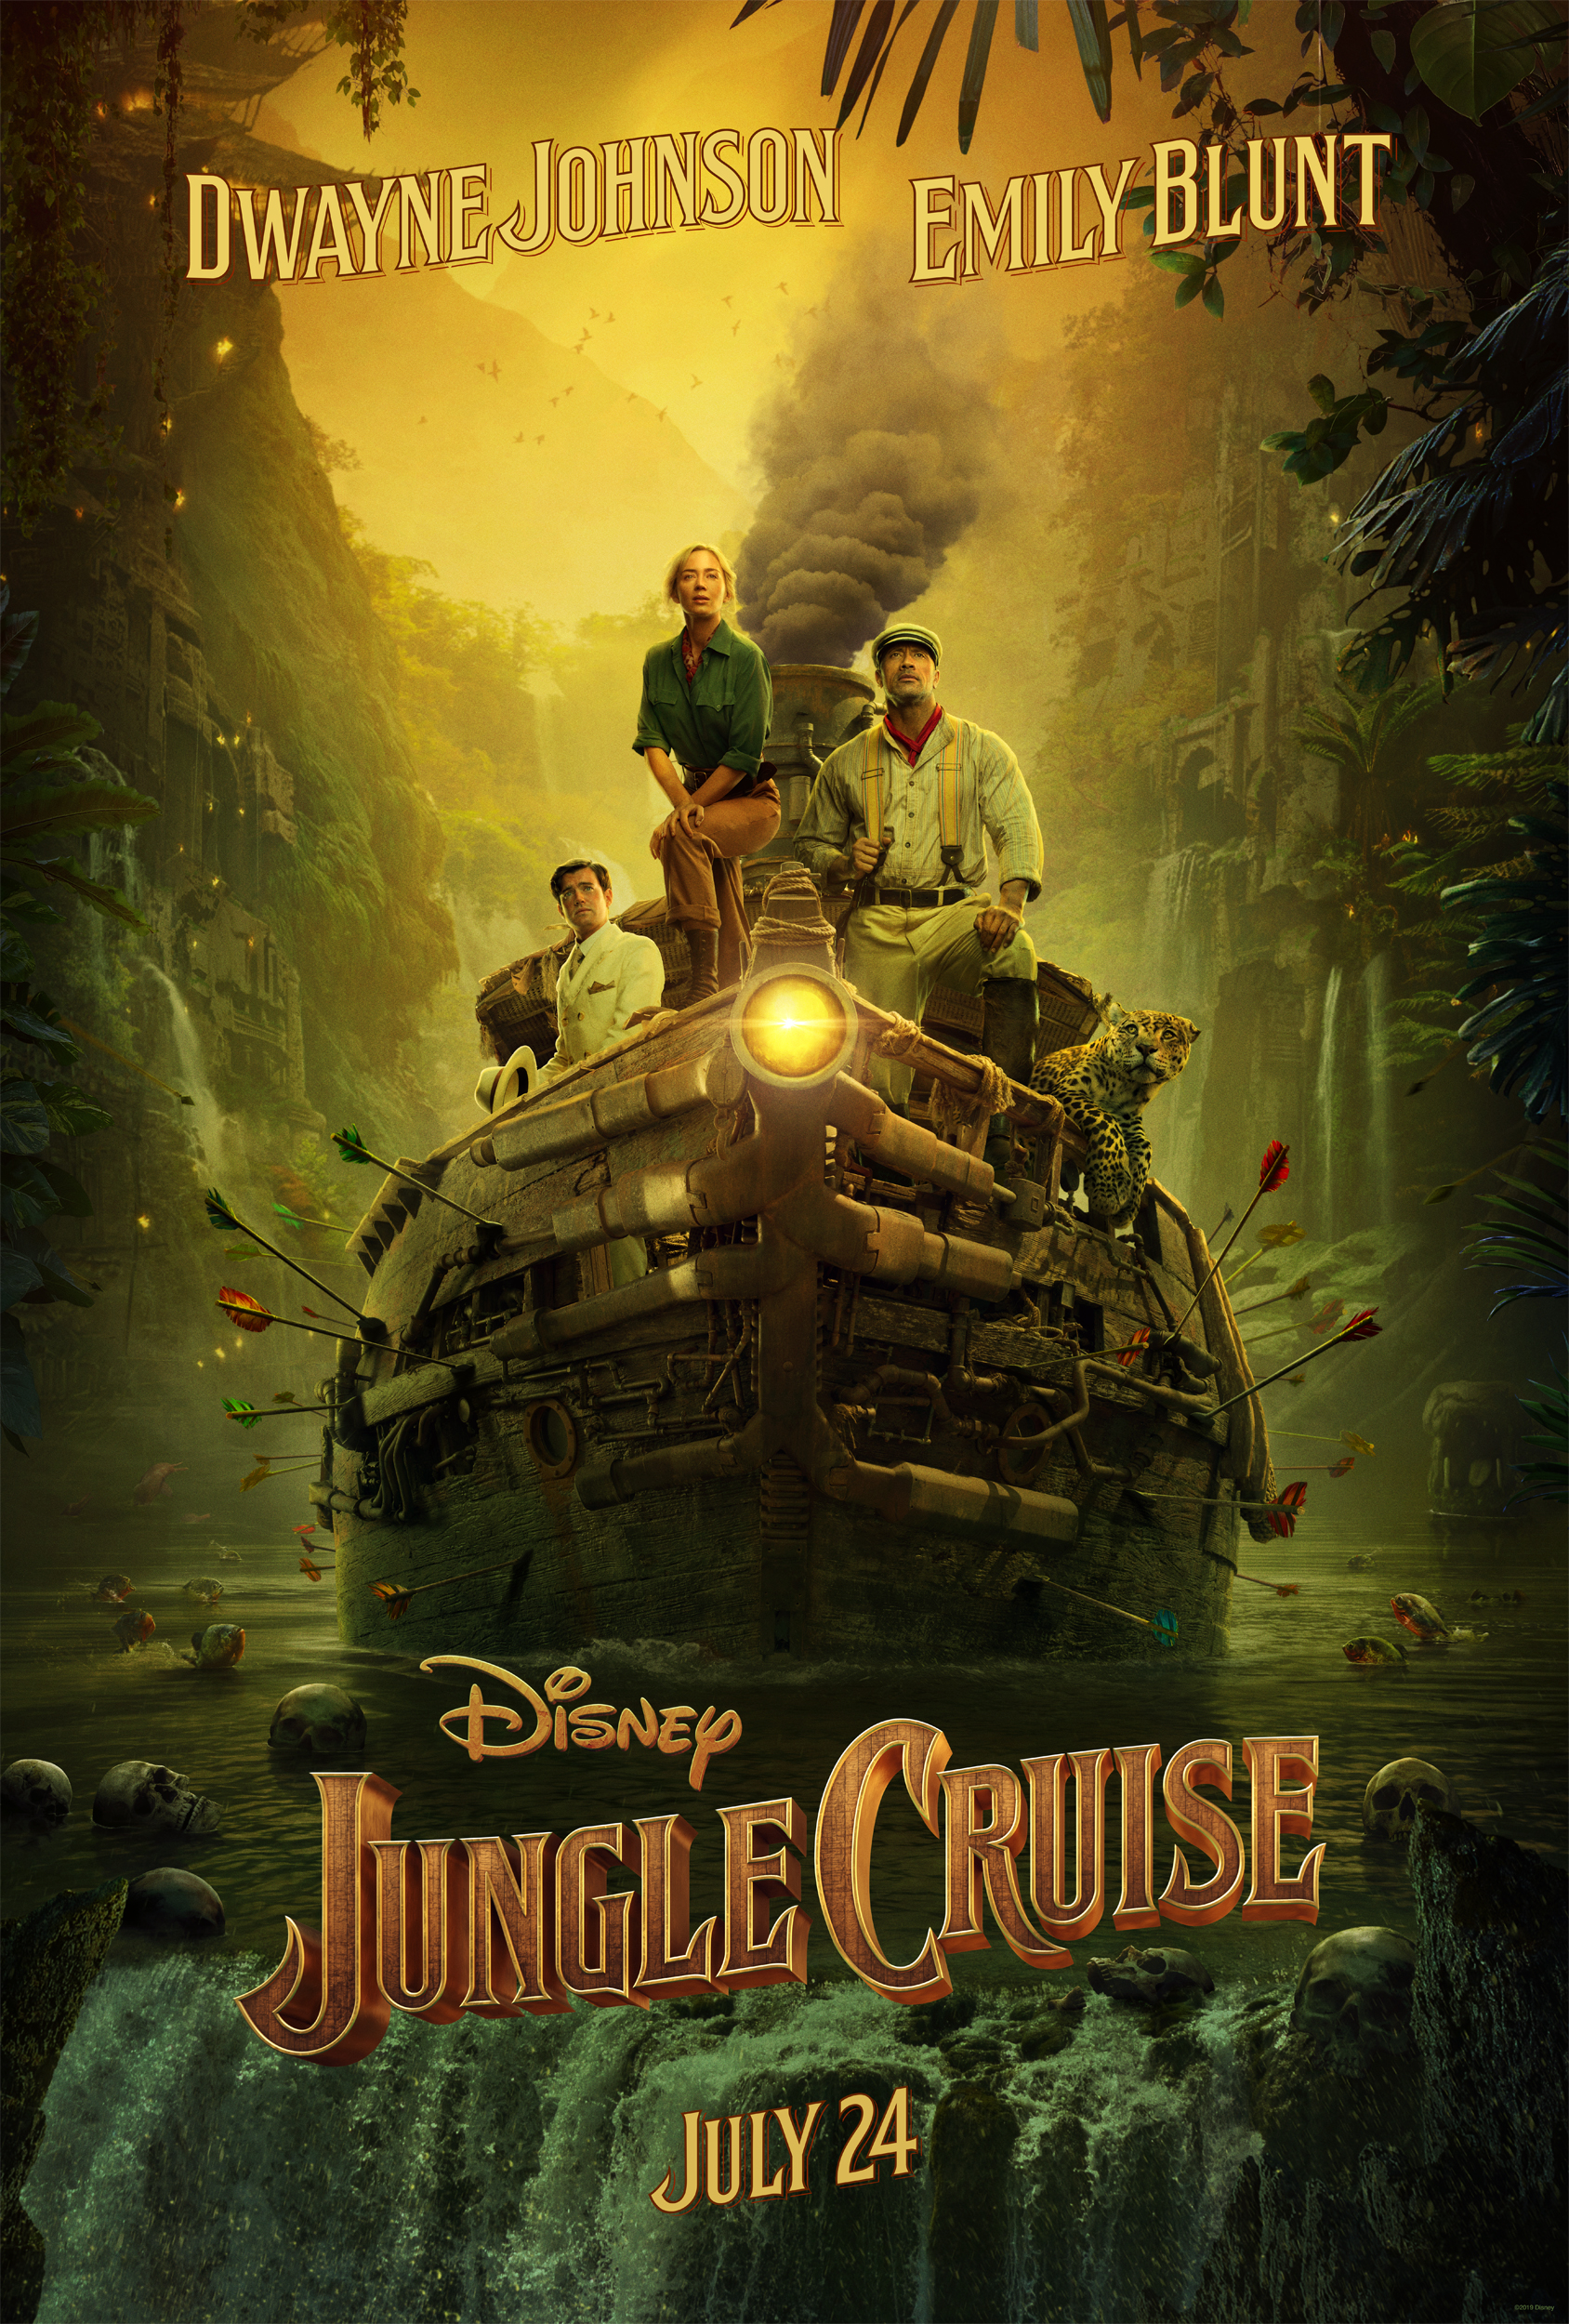 First Look: Jungle Cruise Teaser Trailer & Poster